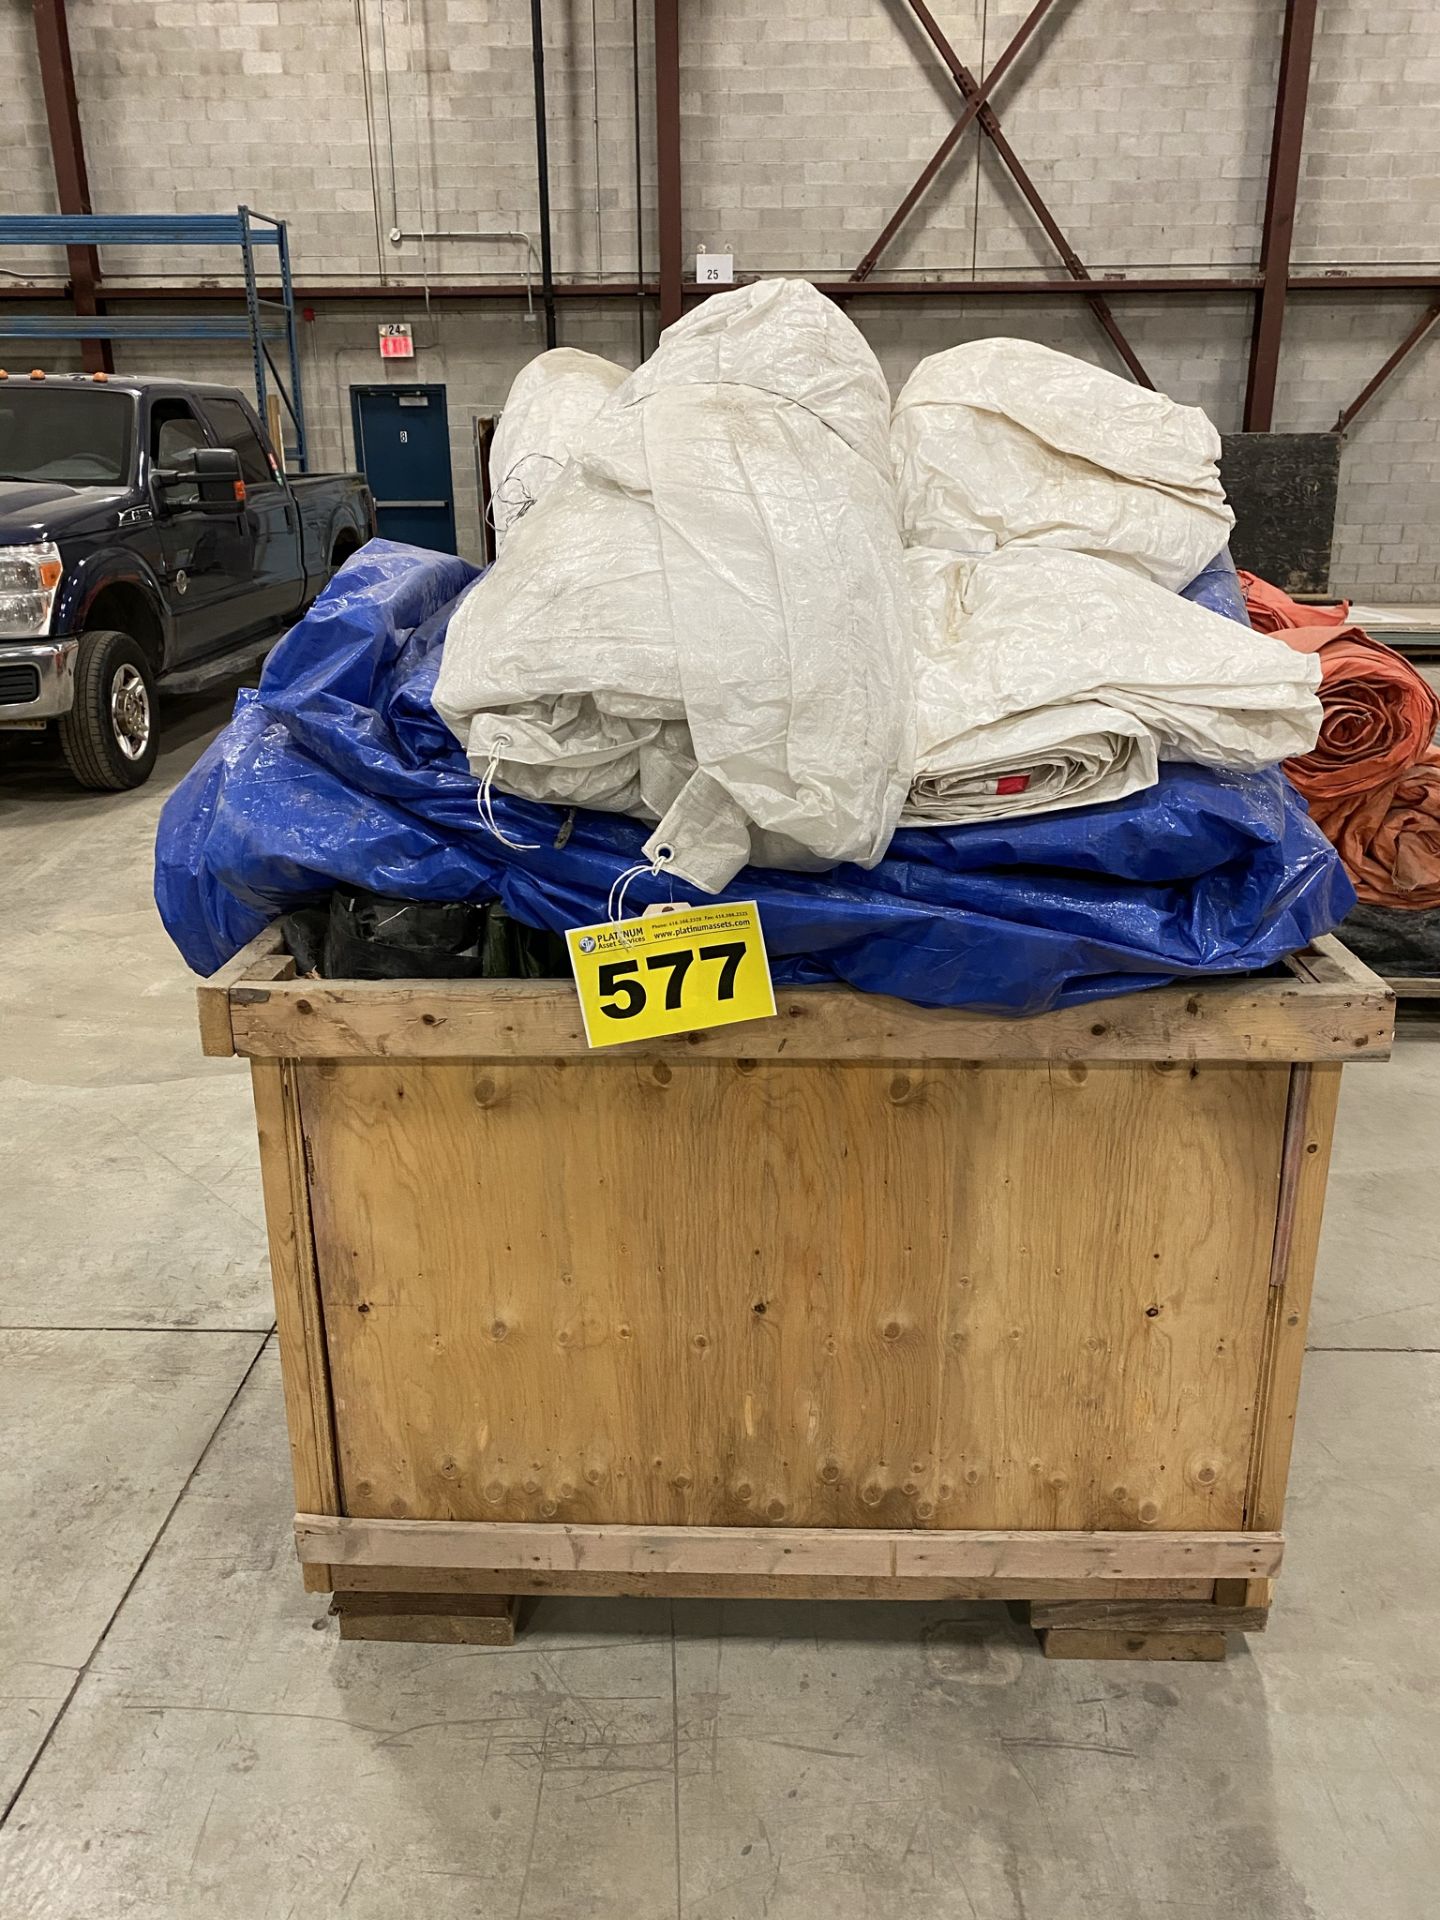 LOT OF (8) LARGE CONSTRUCTION TARPS IN WOODEN TRAVEL TOTES, 4' X 4'